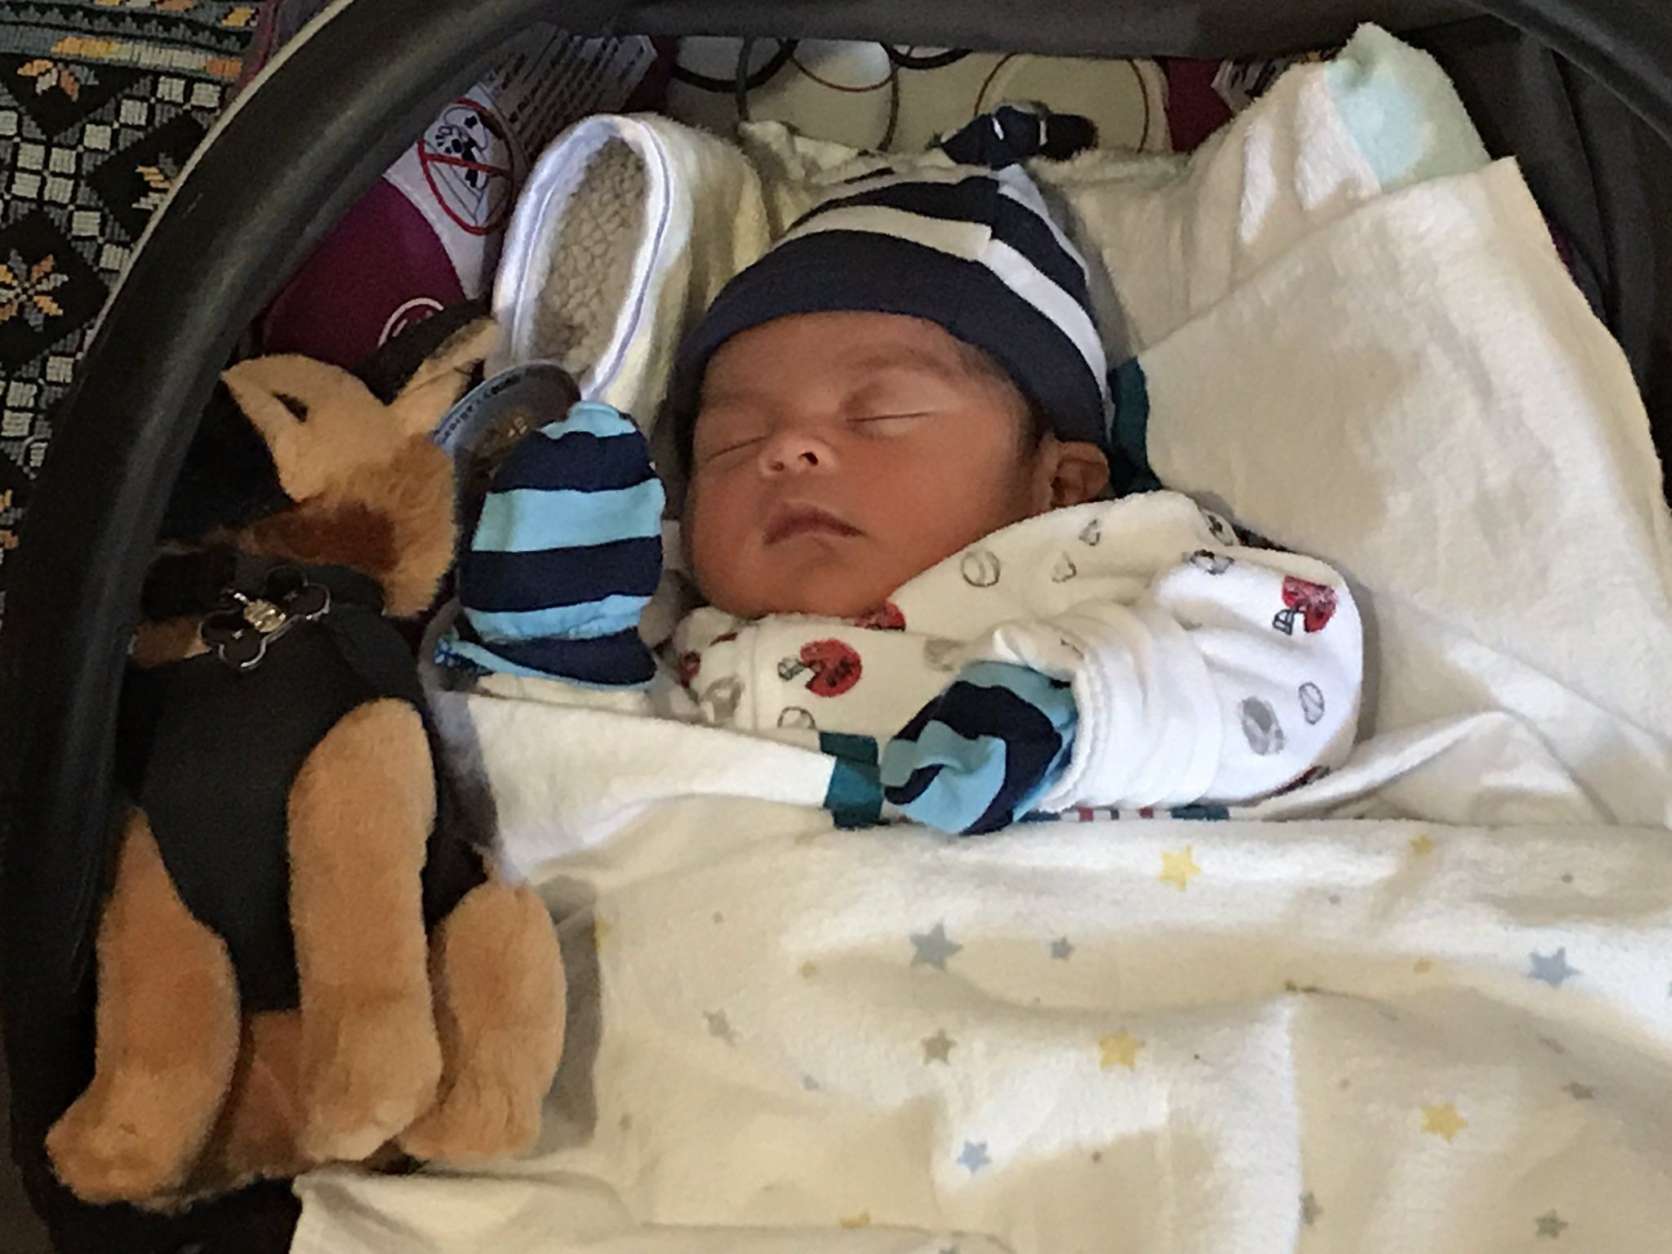 A PGPD officer helped deliver baby Carlos in a minivan along East West Hwy Thurs. That's a stuffed police dog next to the little guy. (WTOP/Michelle Basch)